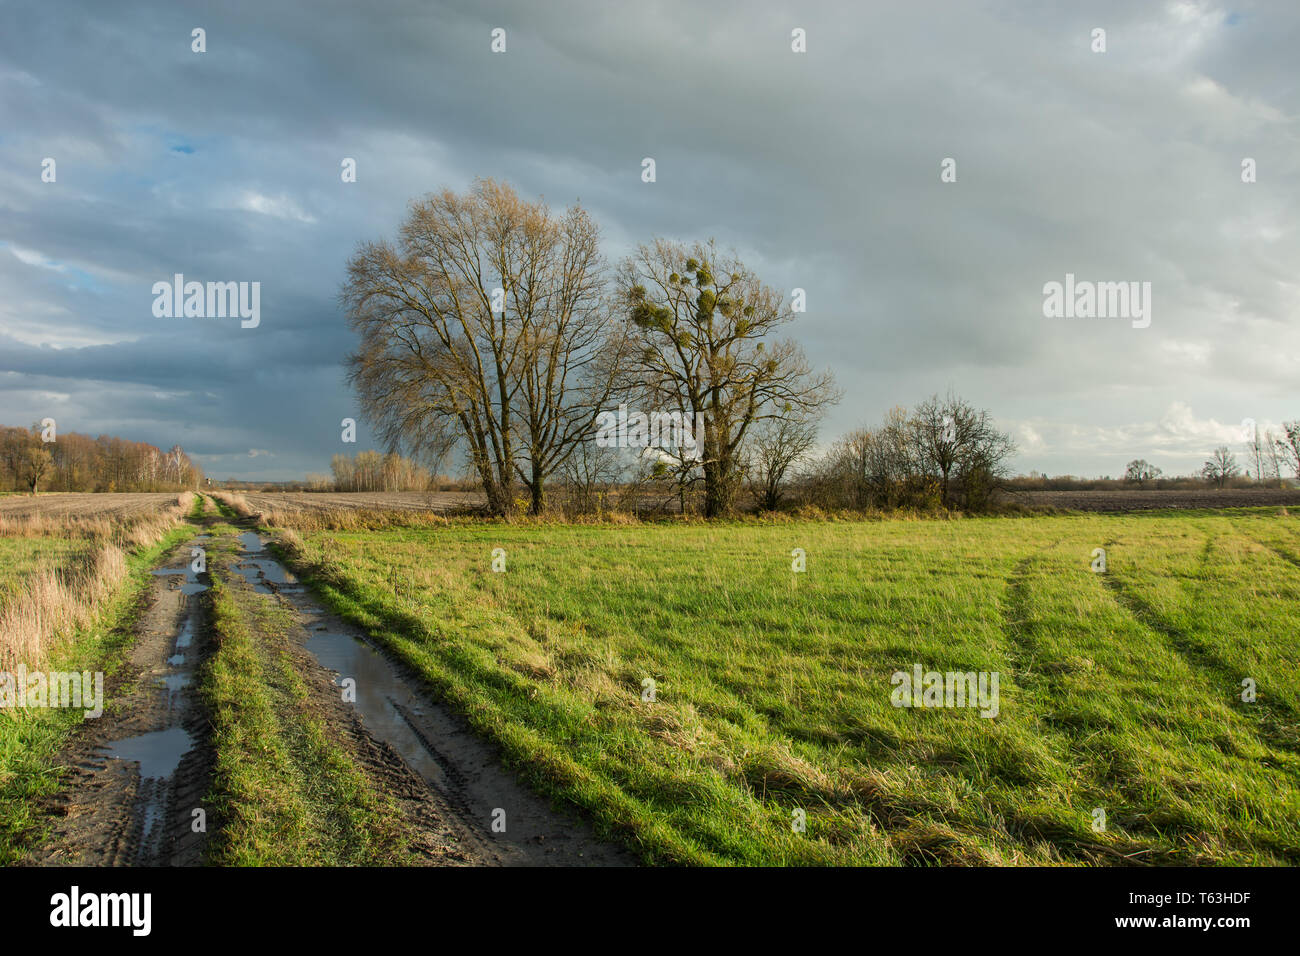 Traces of wheels and puddles on a dirt road through a green meadow, trees without leaves and rainy clouds in the sky Stock Photo